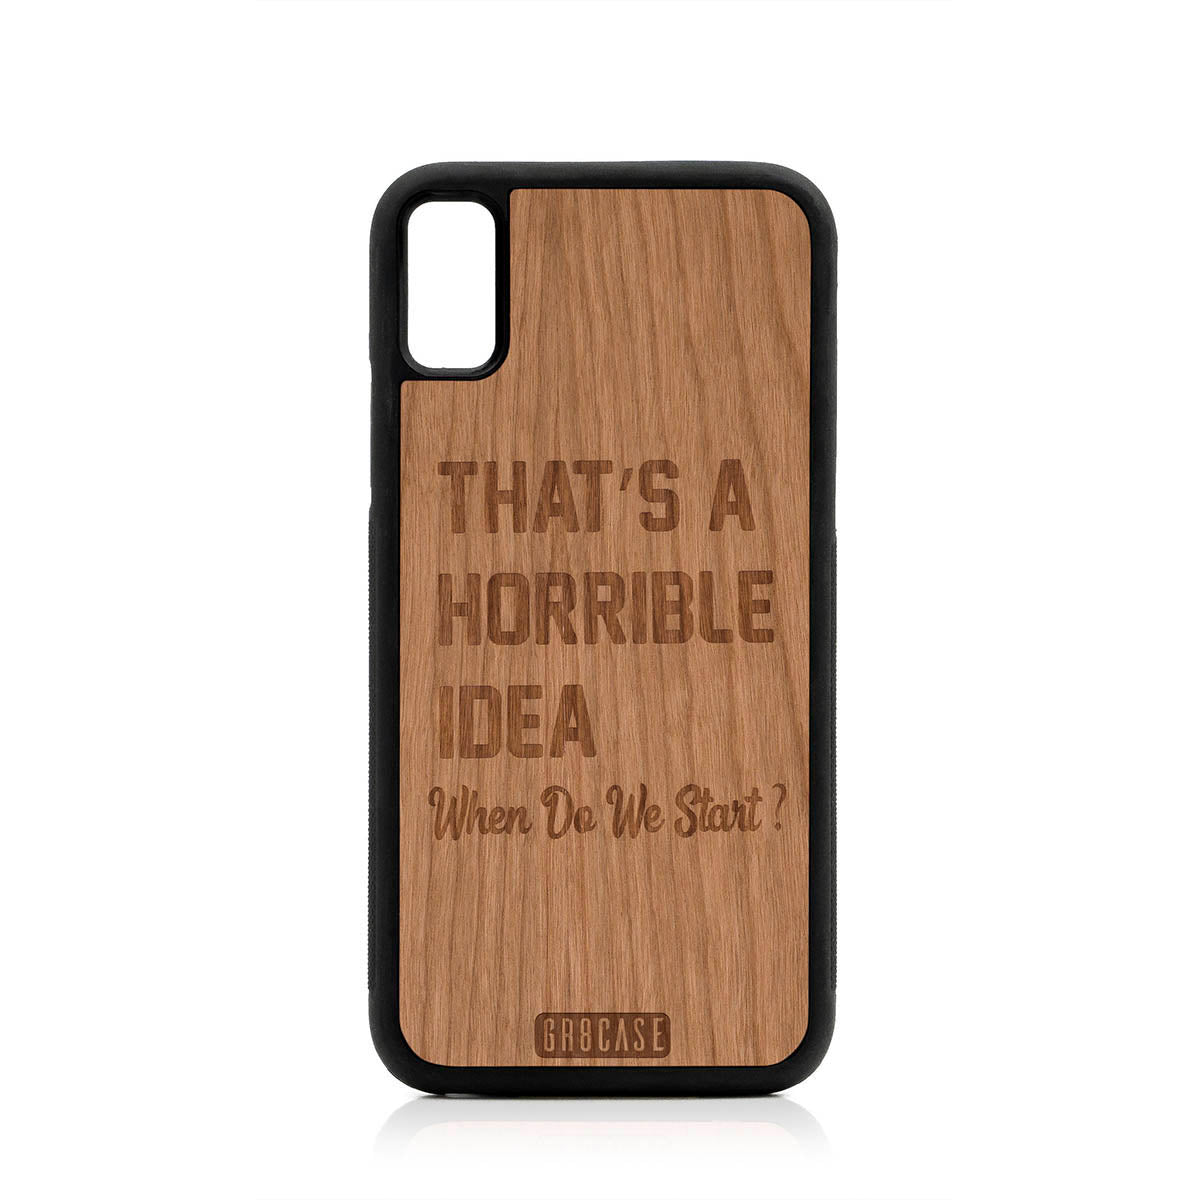 That's A Horrible idea When Do We Start? Design Wood Case For iPhone XS Max